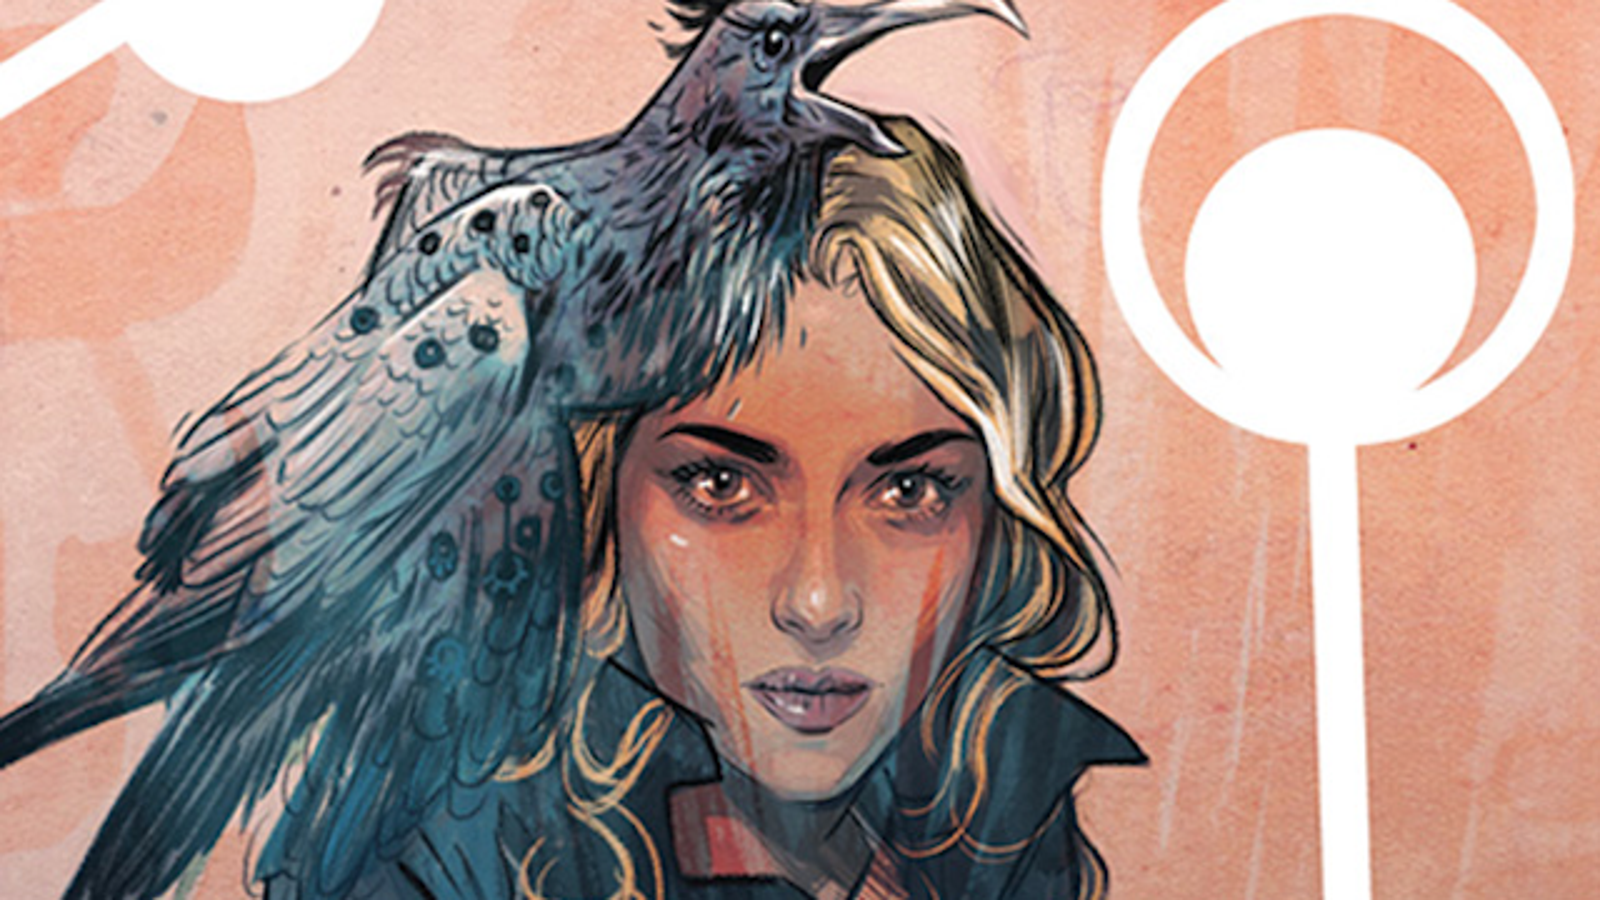 Check Out This Three-Page Preview of Warren Ellis' Supreme: Blue Rose